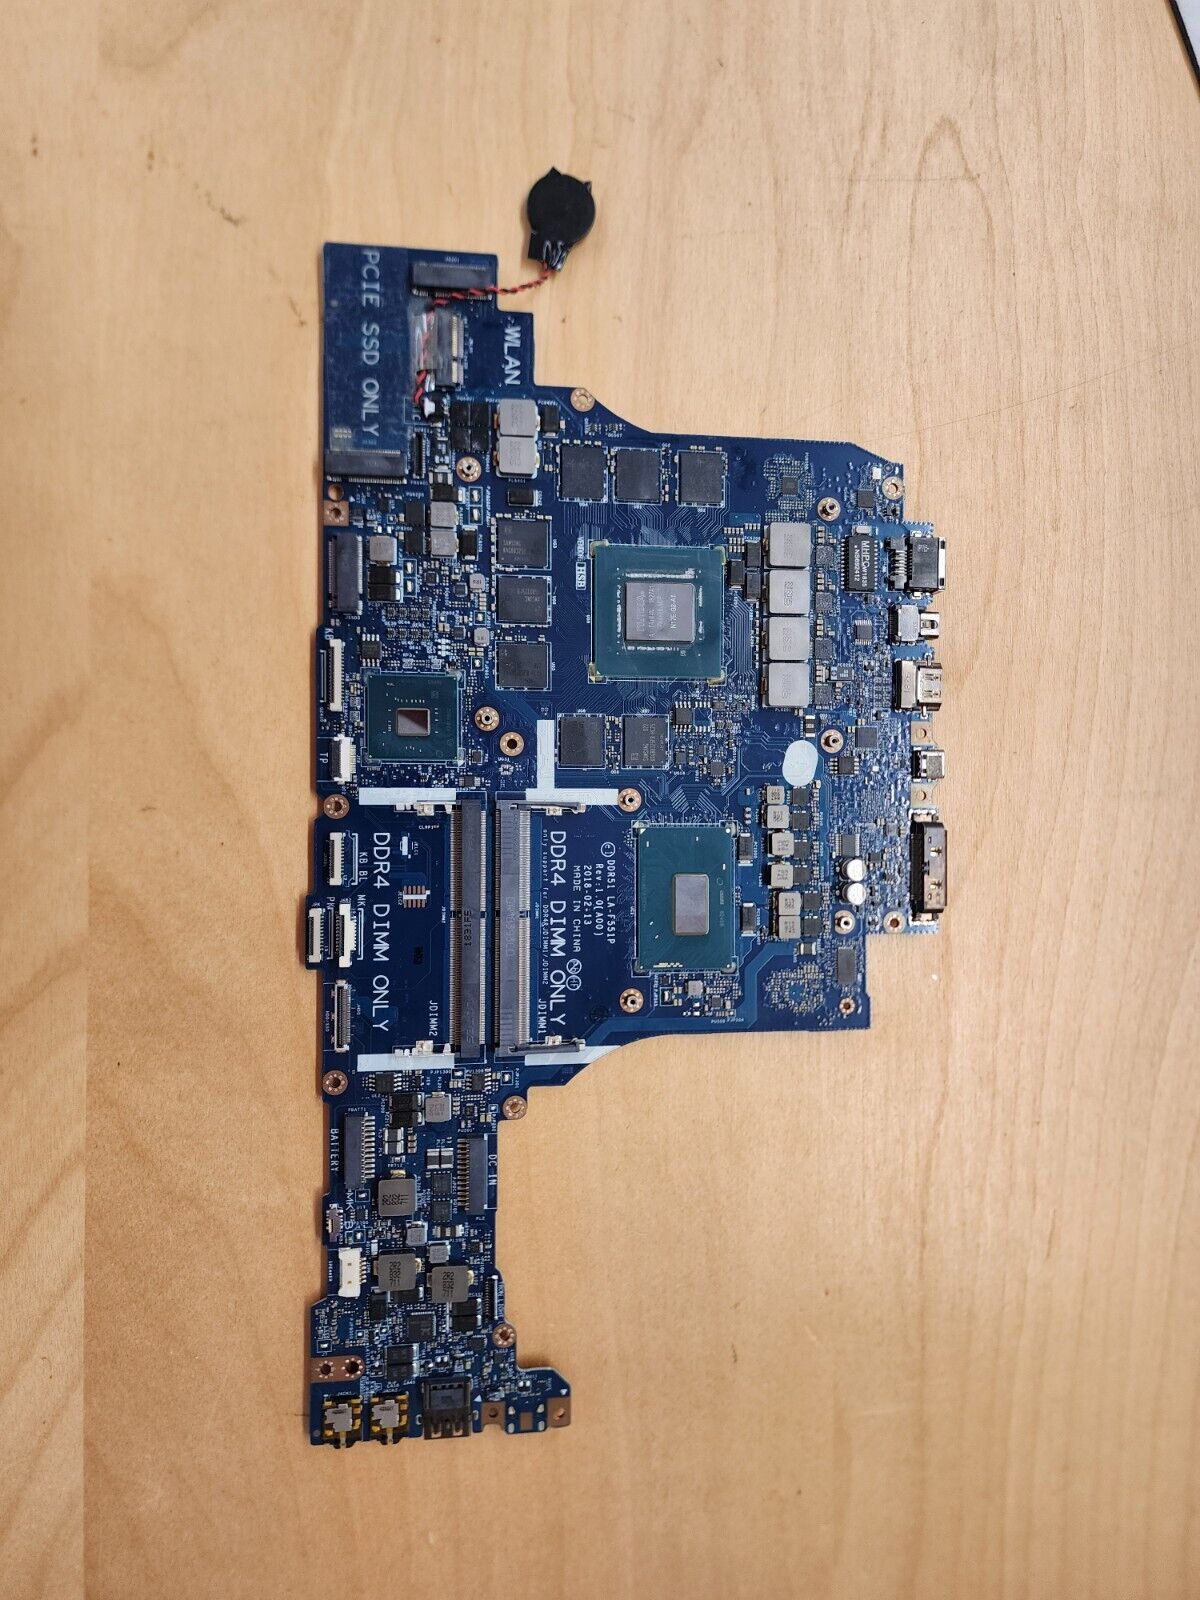 DELL MOTHERBOARD I7-8750H GTX 1070 8GB ALIENWARE 17 R5 P31, gaming Laptop